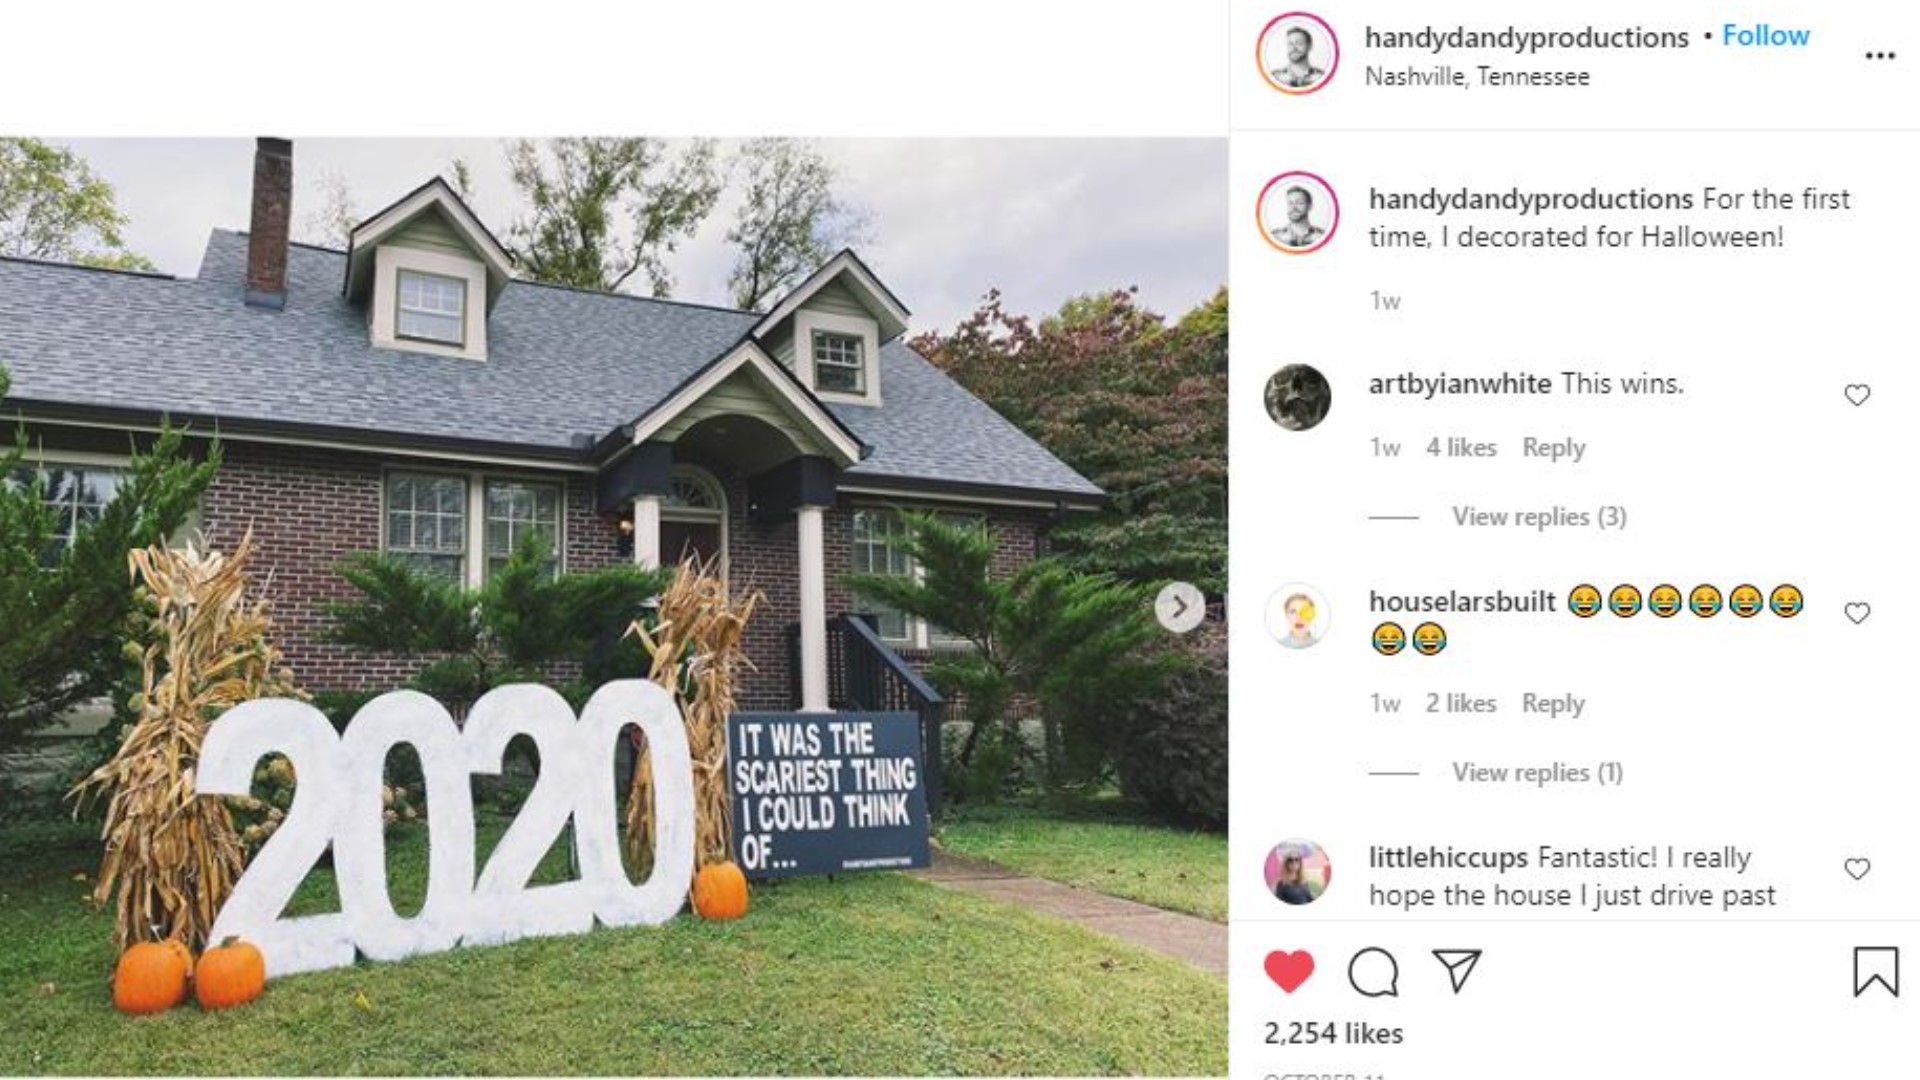 On his front lawn, James Worsham placed a large wood cutout of the numbers "2020" and beside it a sign that reads, "It was the scariest thing I could think of ..."